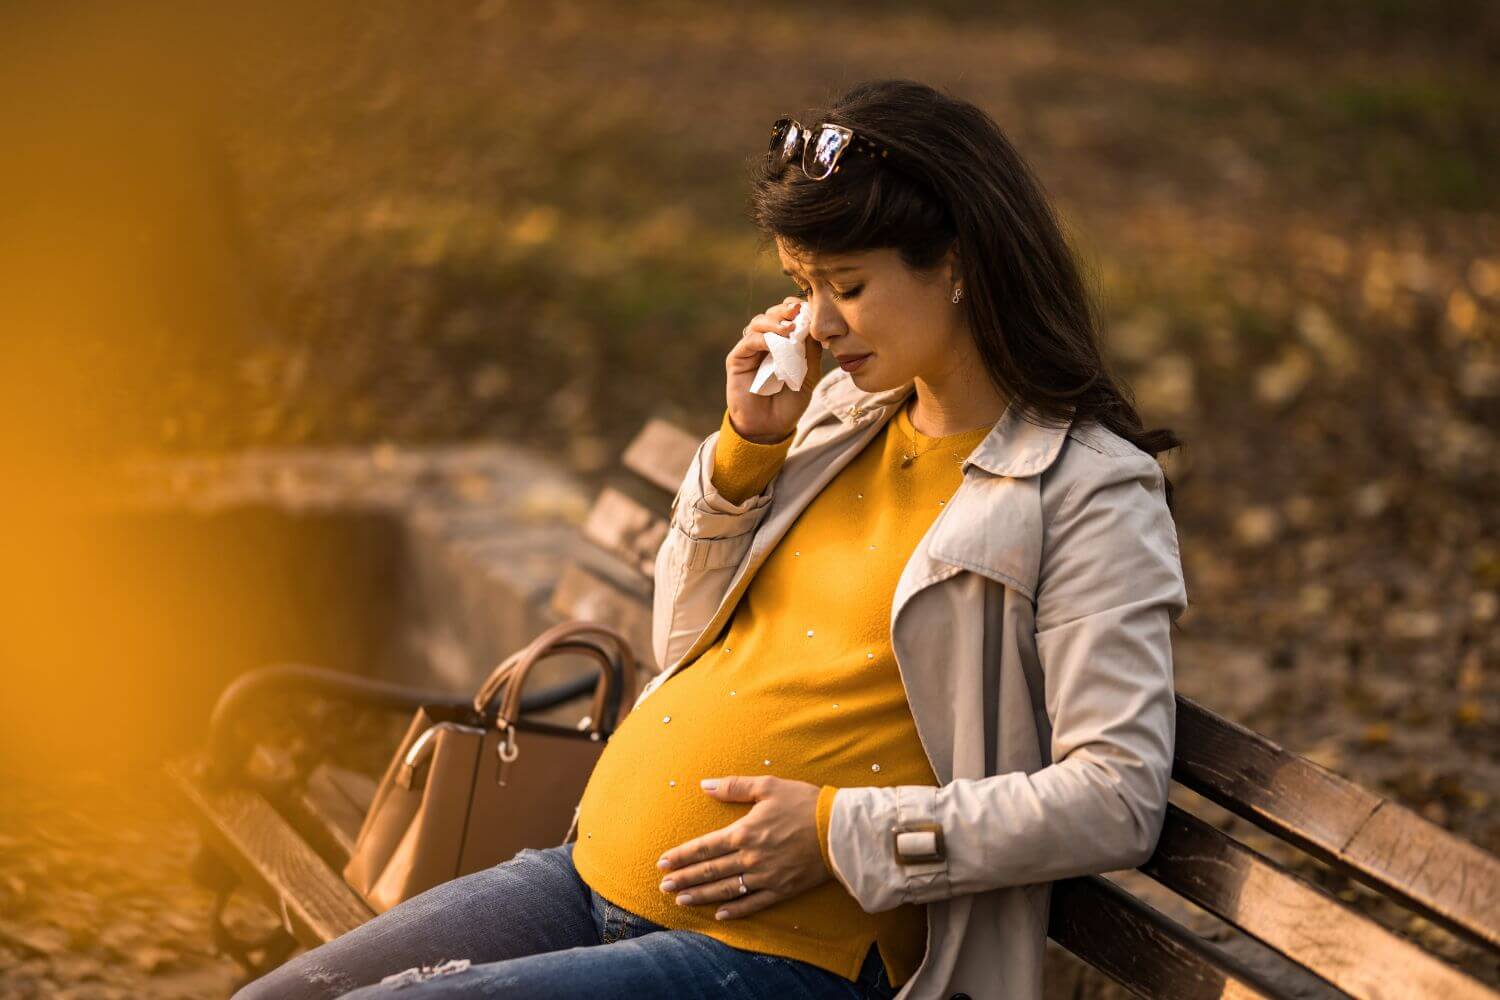 Pregnant woman sitting on a bench outside, crying